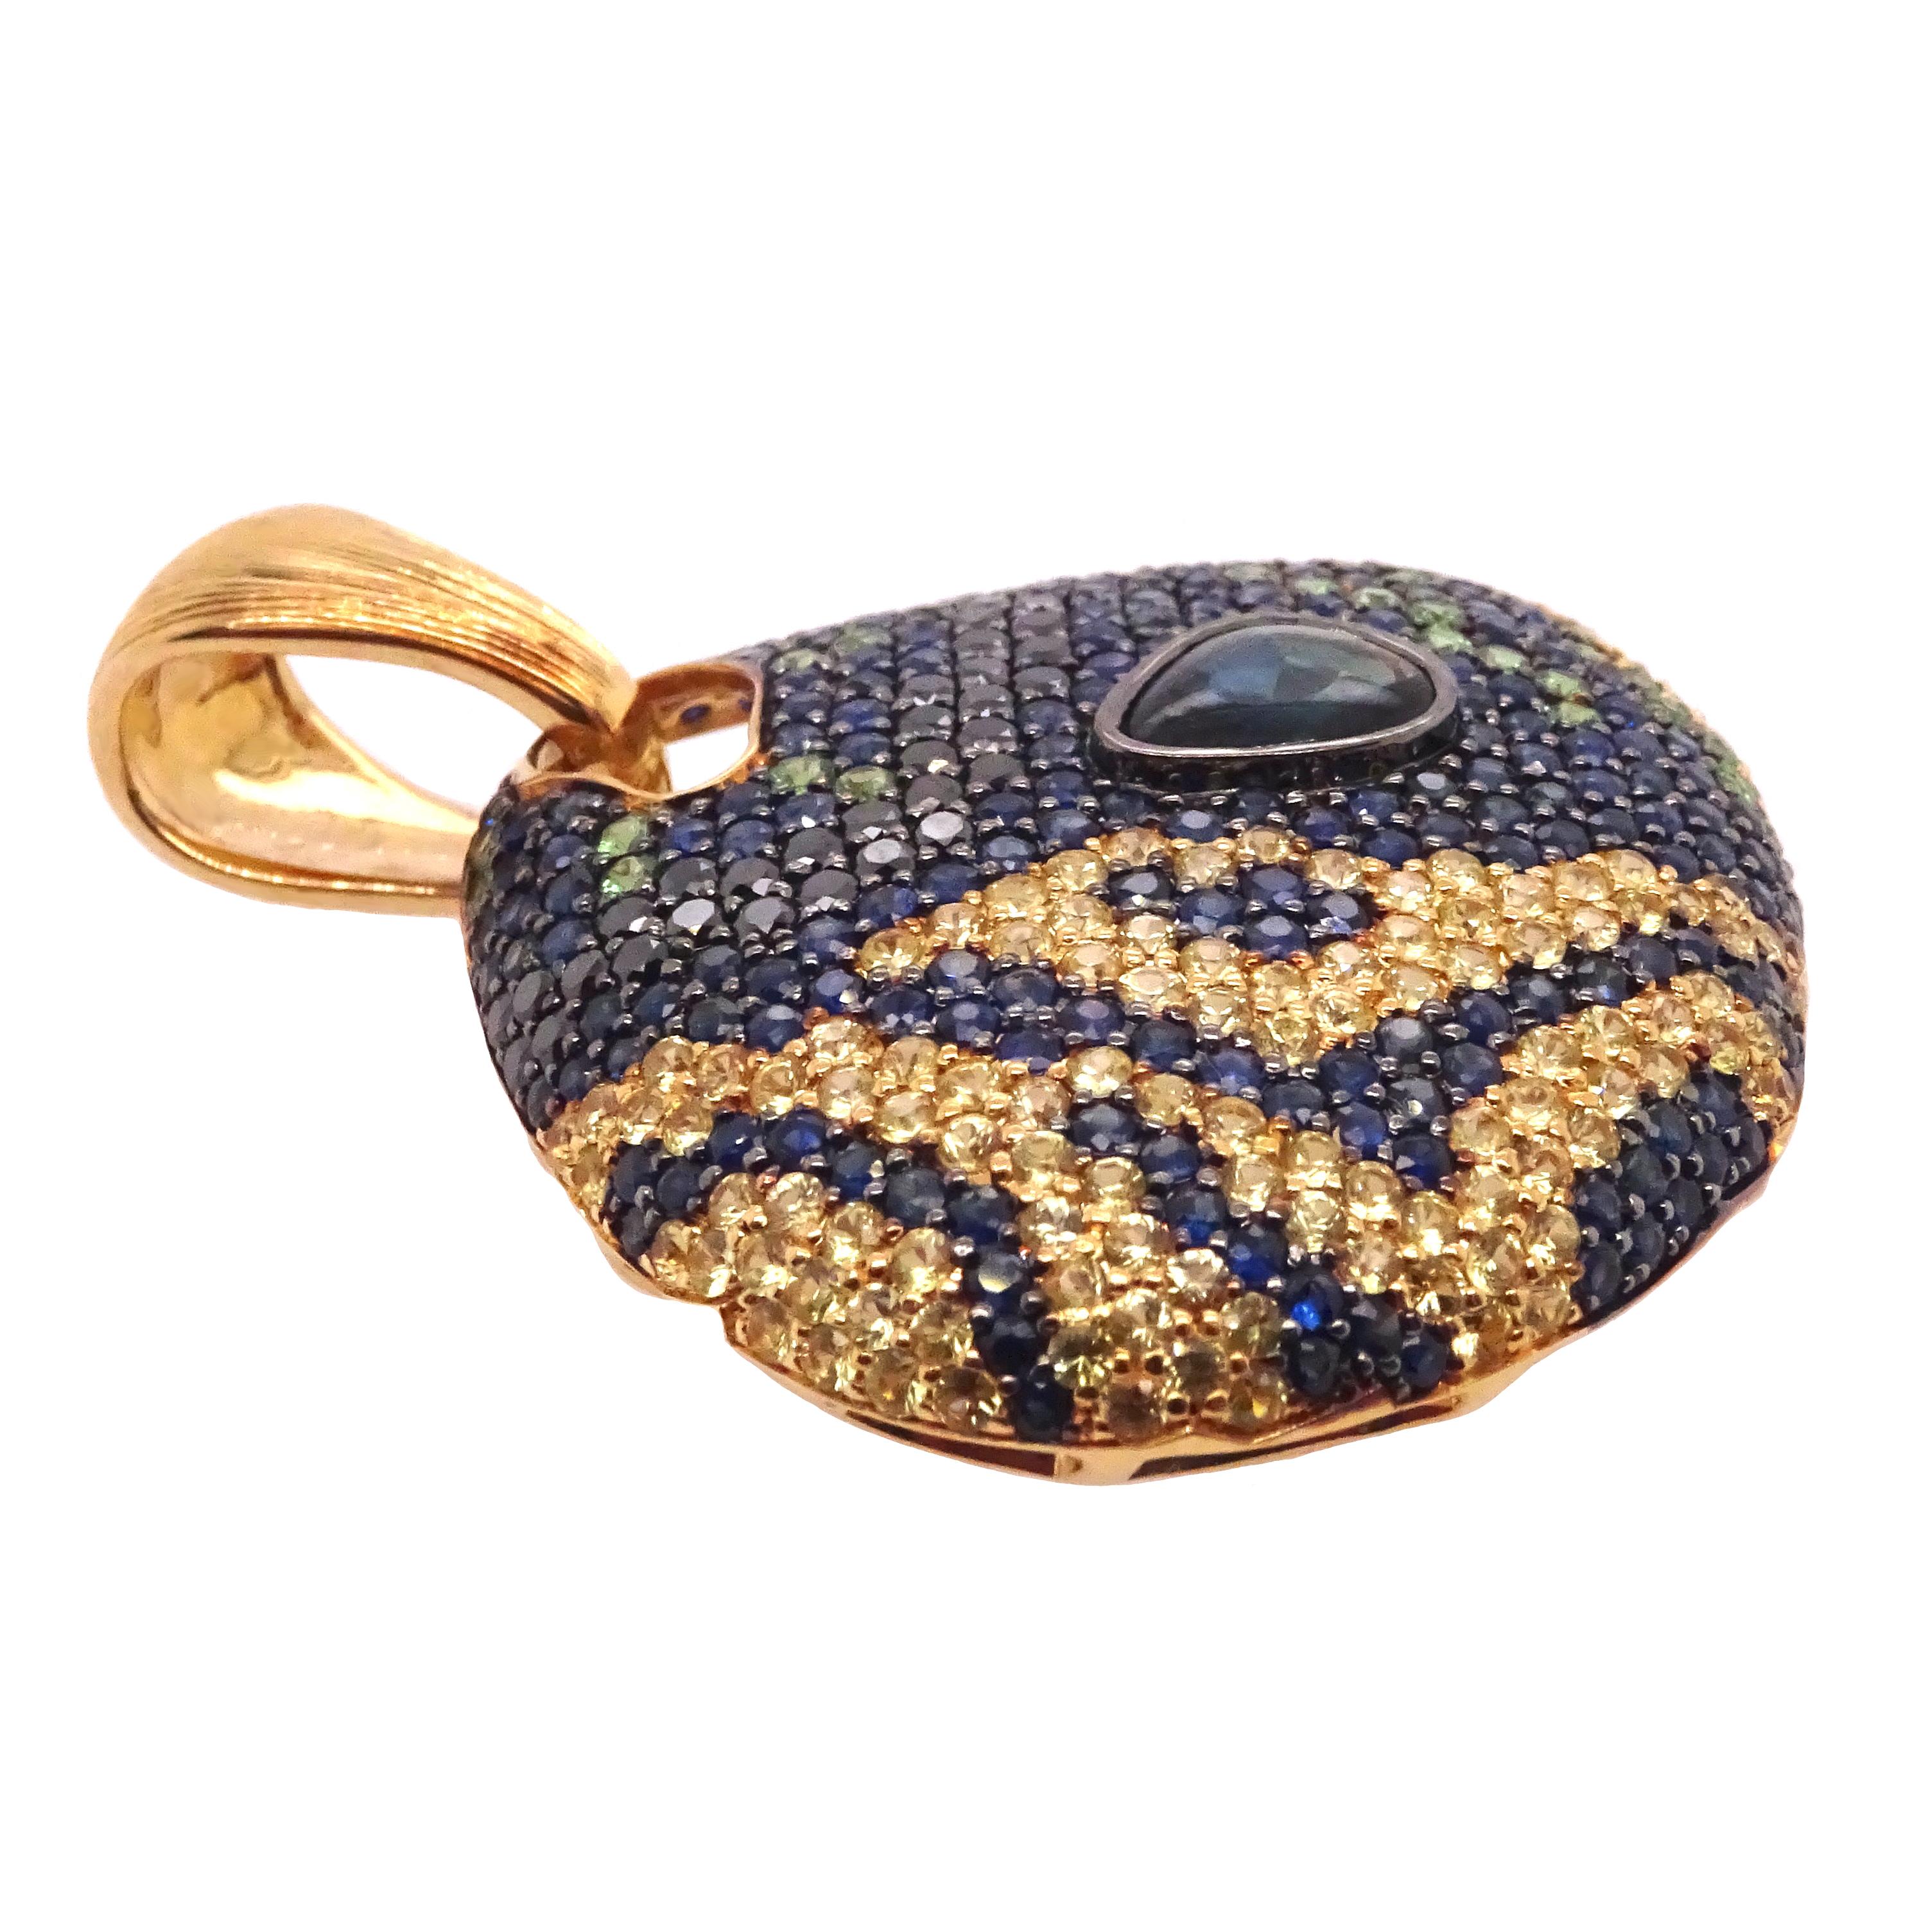 Ocean Dreams collection by VOTIVE.

Welcome to VOTIVE's Ocean Dreams collection, where the enchanting beauty of marine life comes to life in this exquisite 18K yellow gold pendant adorned with black diamonds, blue and yellow sapphires, and